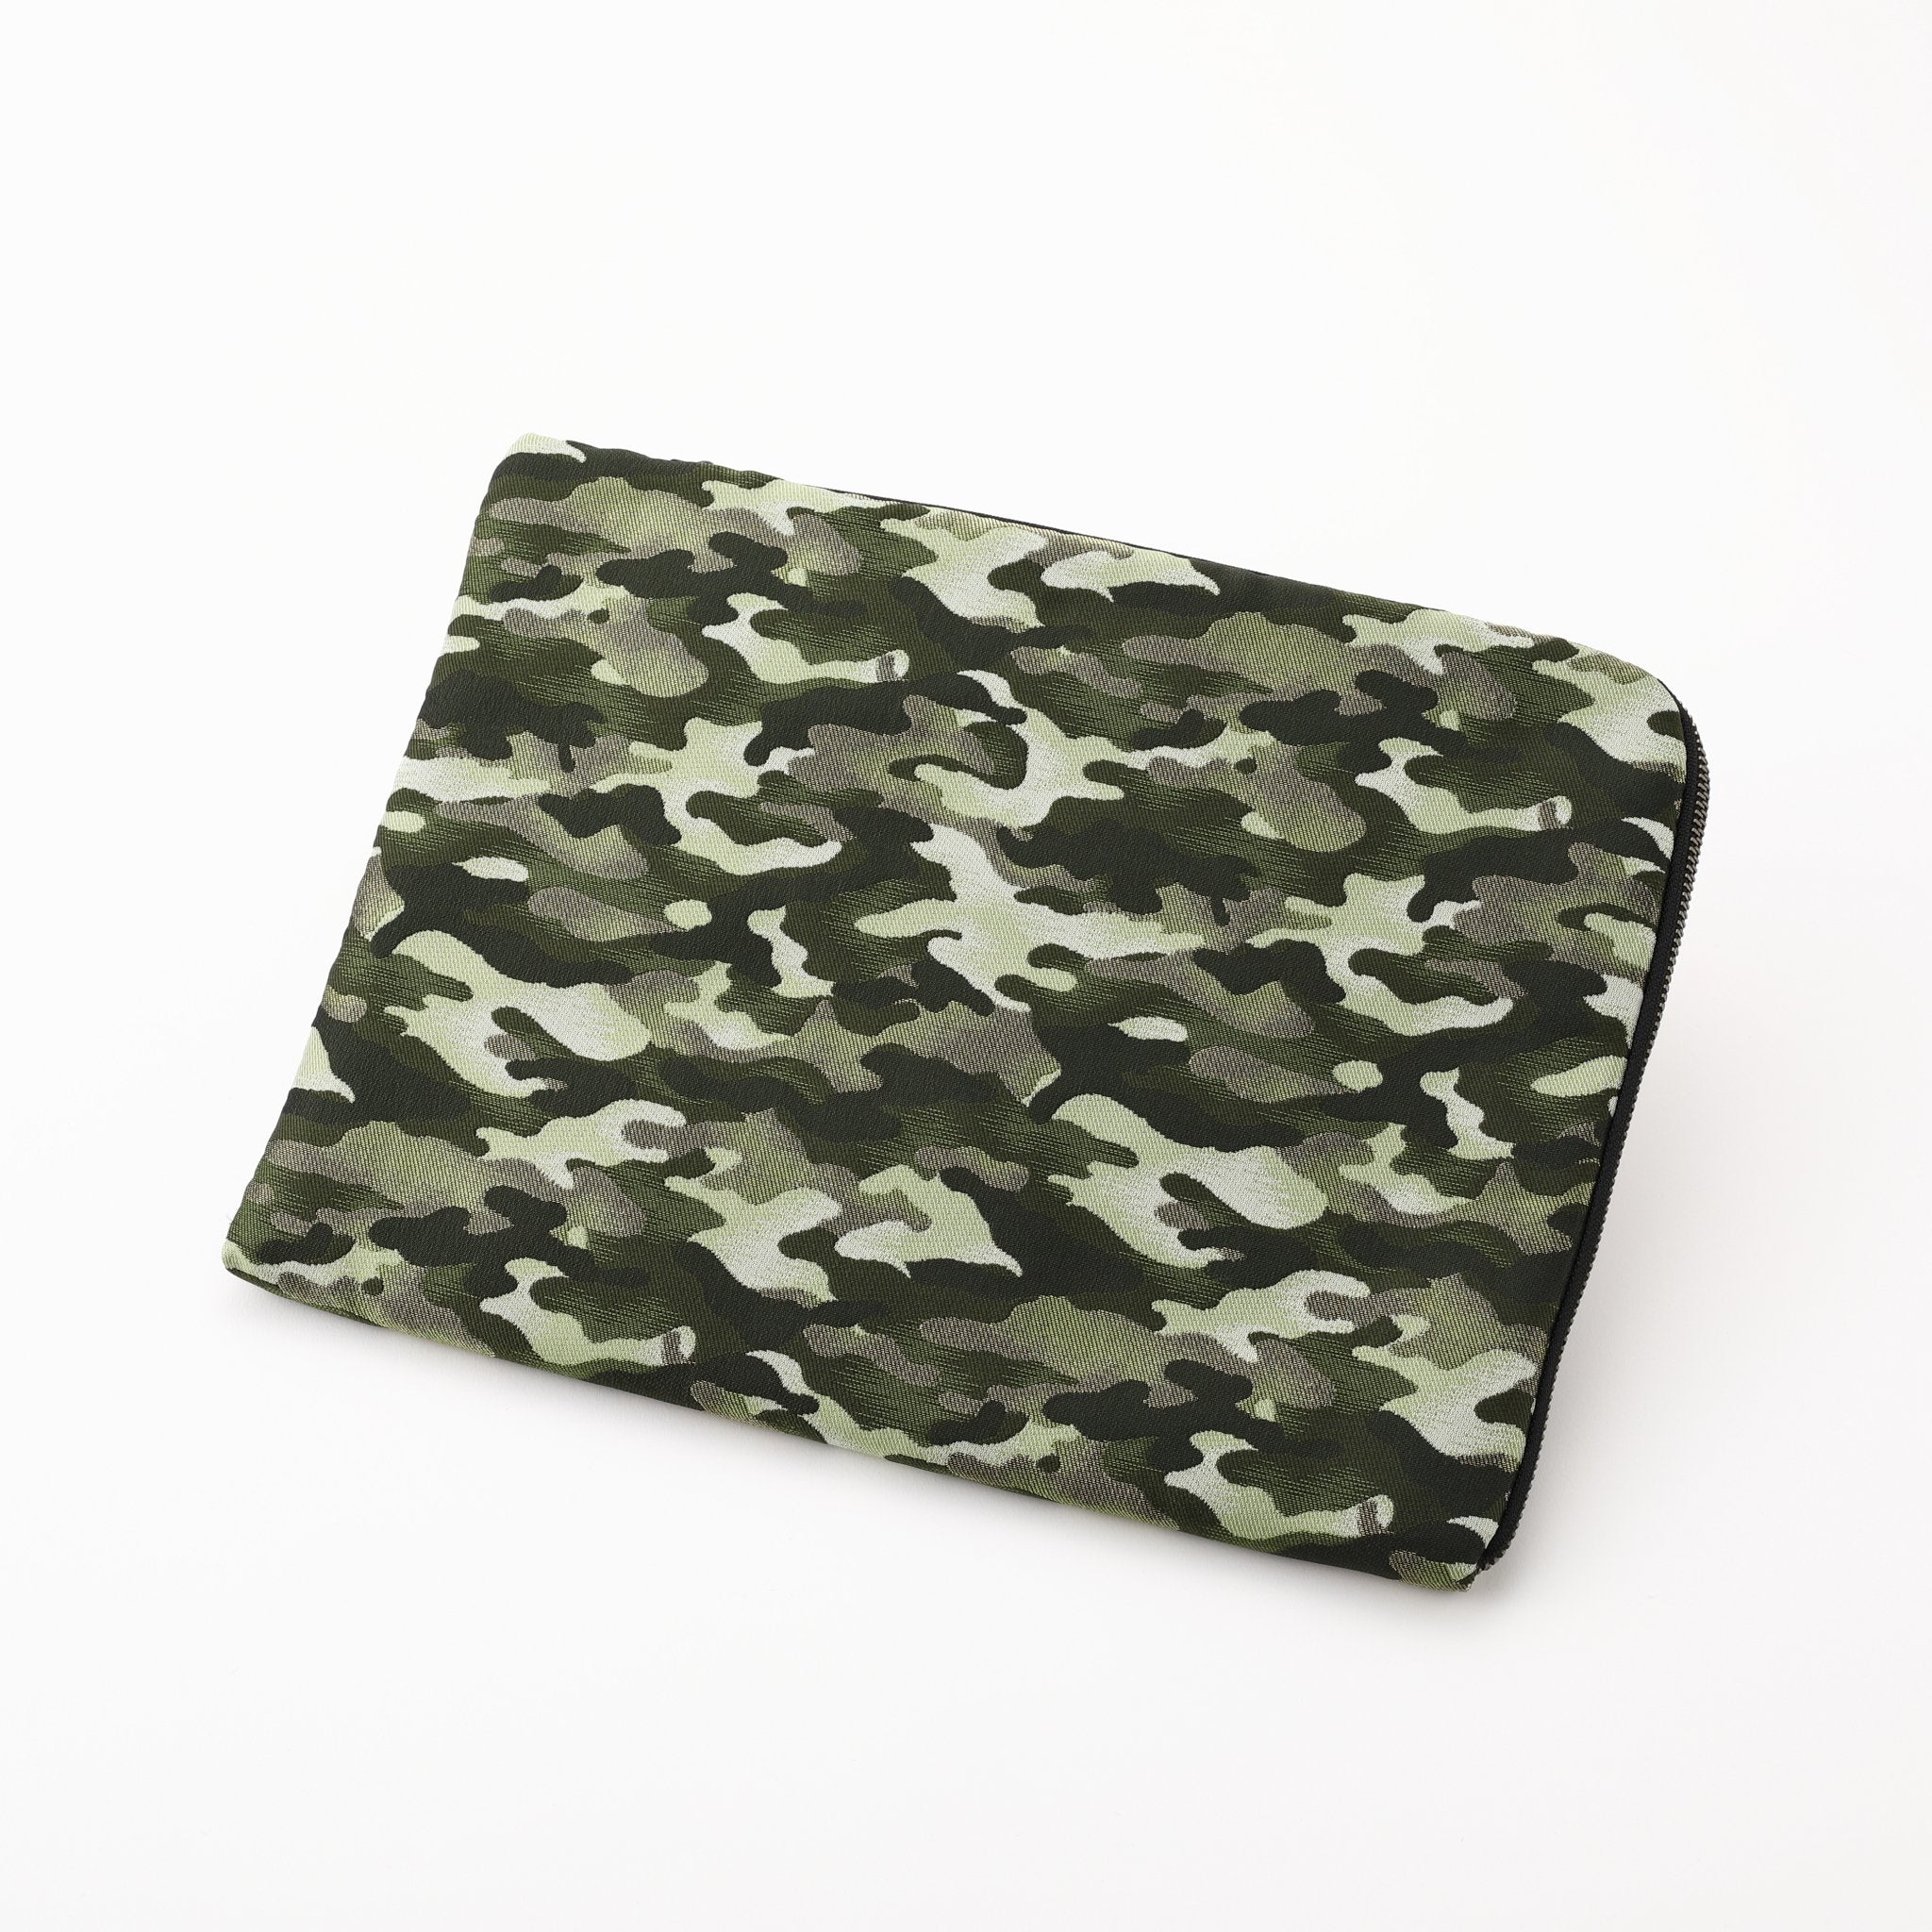 Made in Japan Camoflage Laptop Sleeve